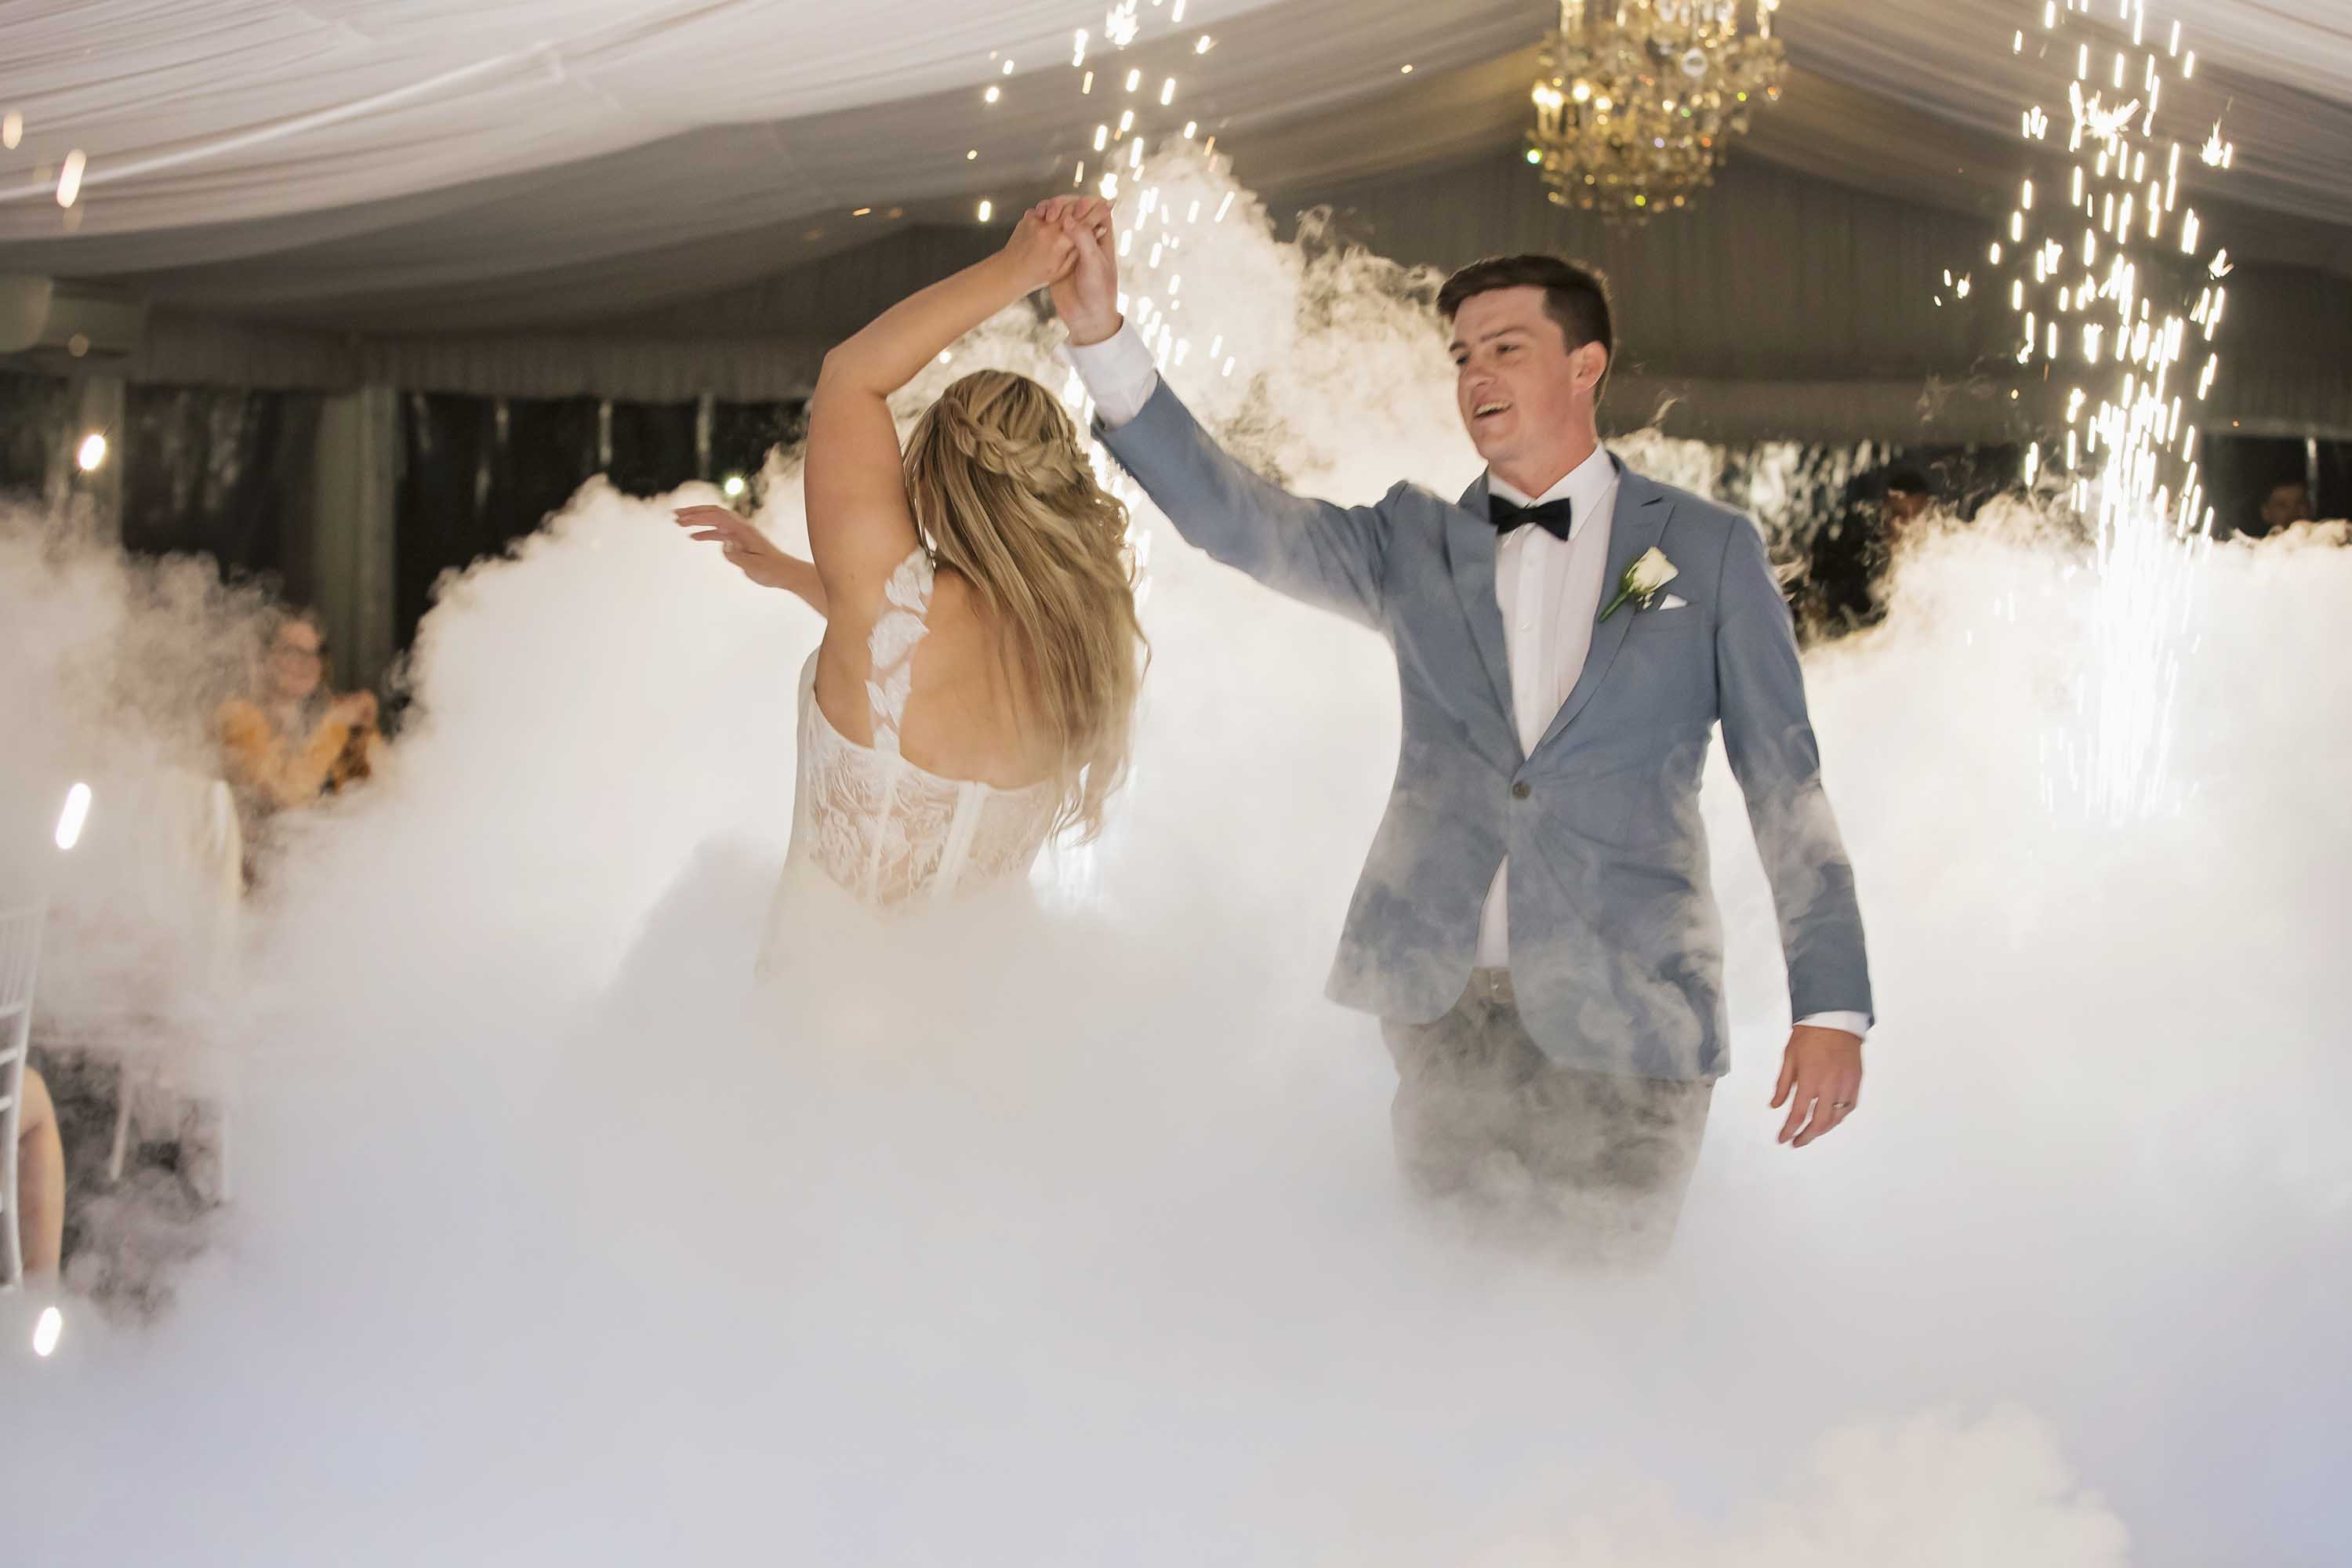 Dancing on Clouds at Caversham House, Swan Valley